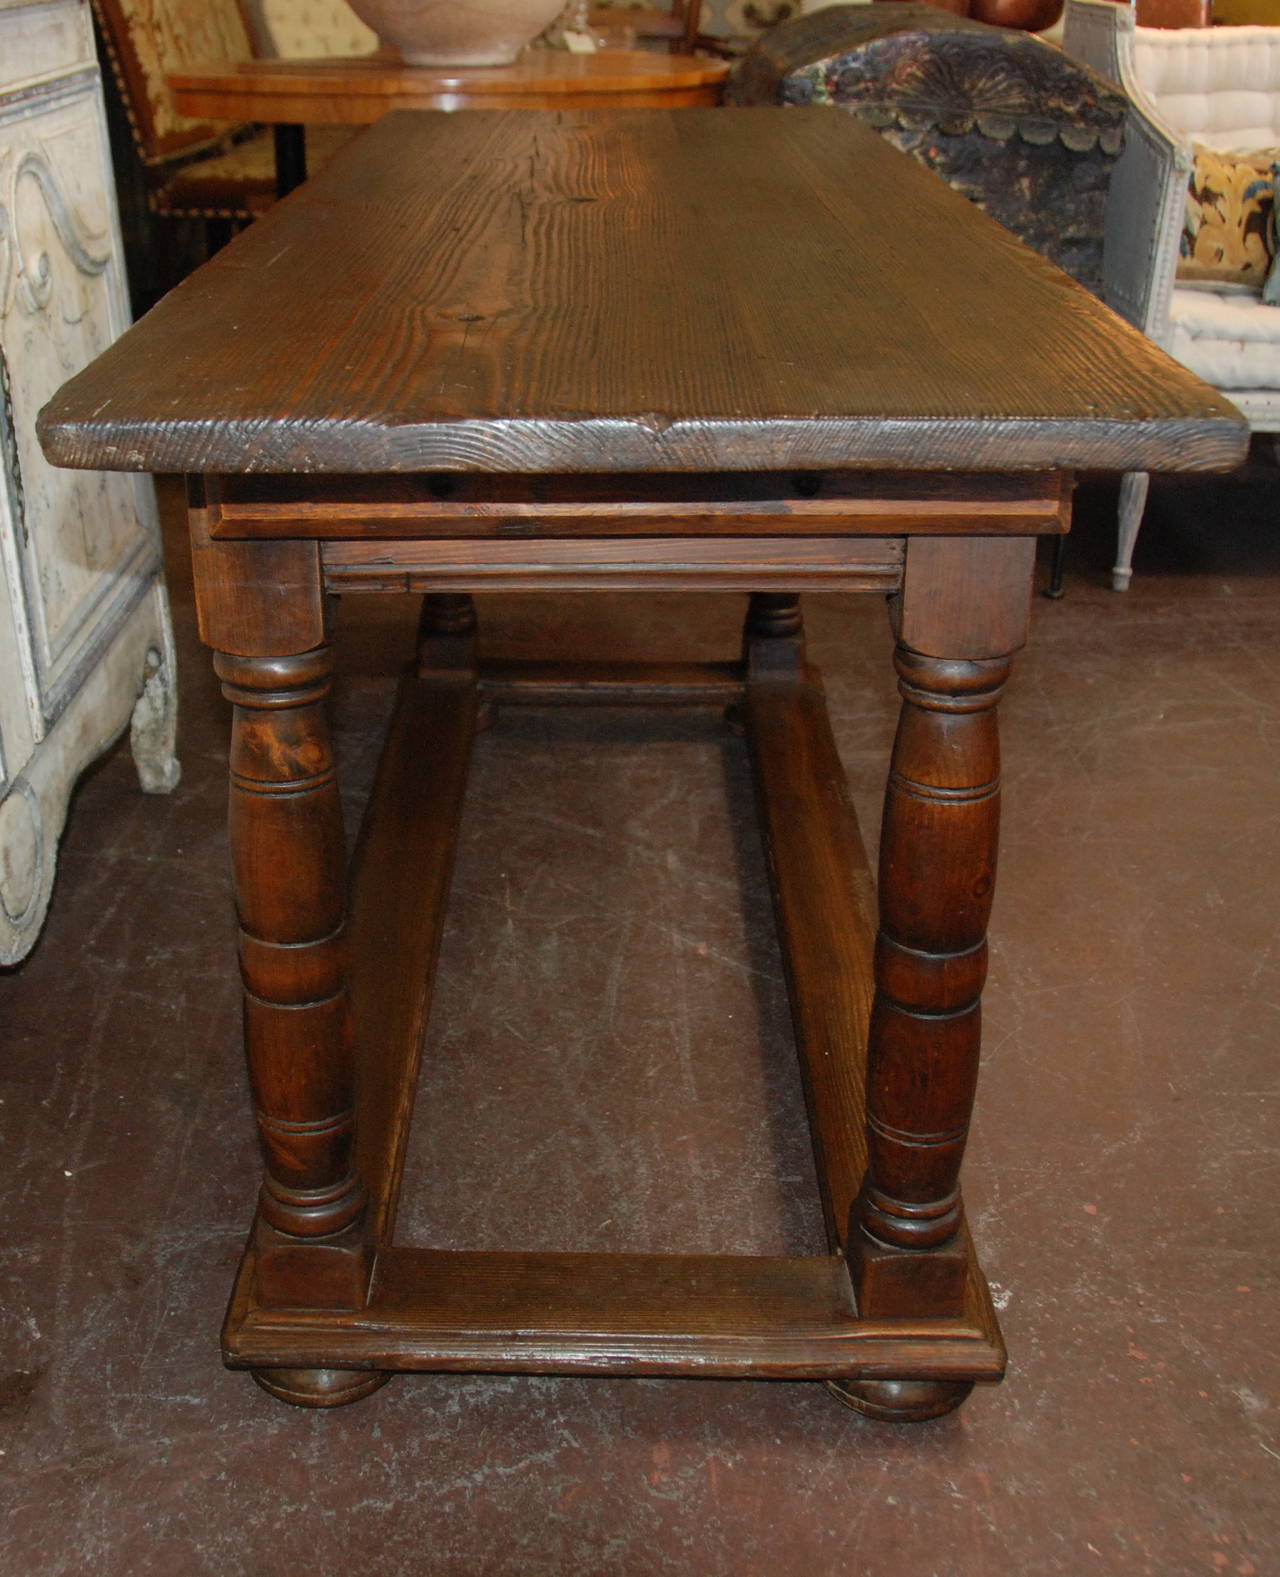 19th century French walnut refectory table from Normandy, France.